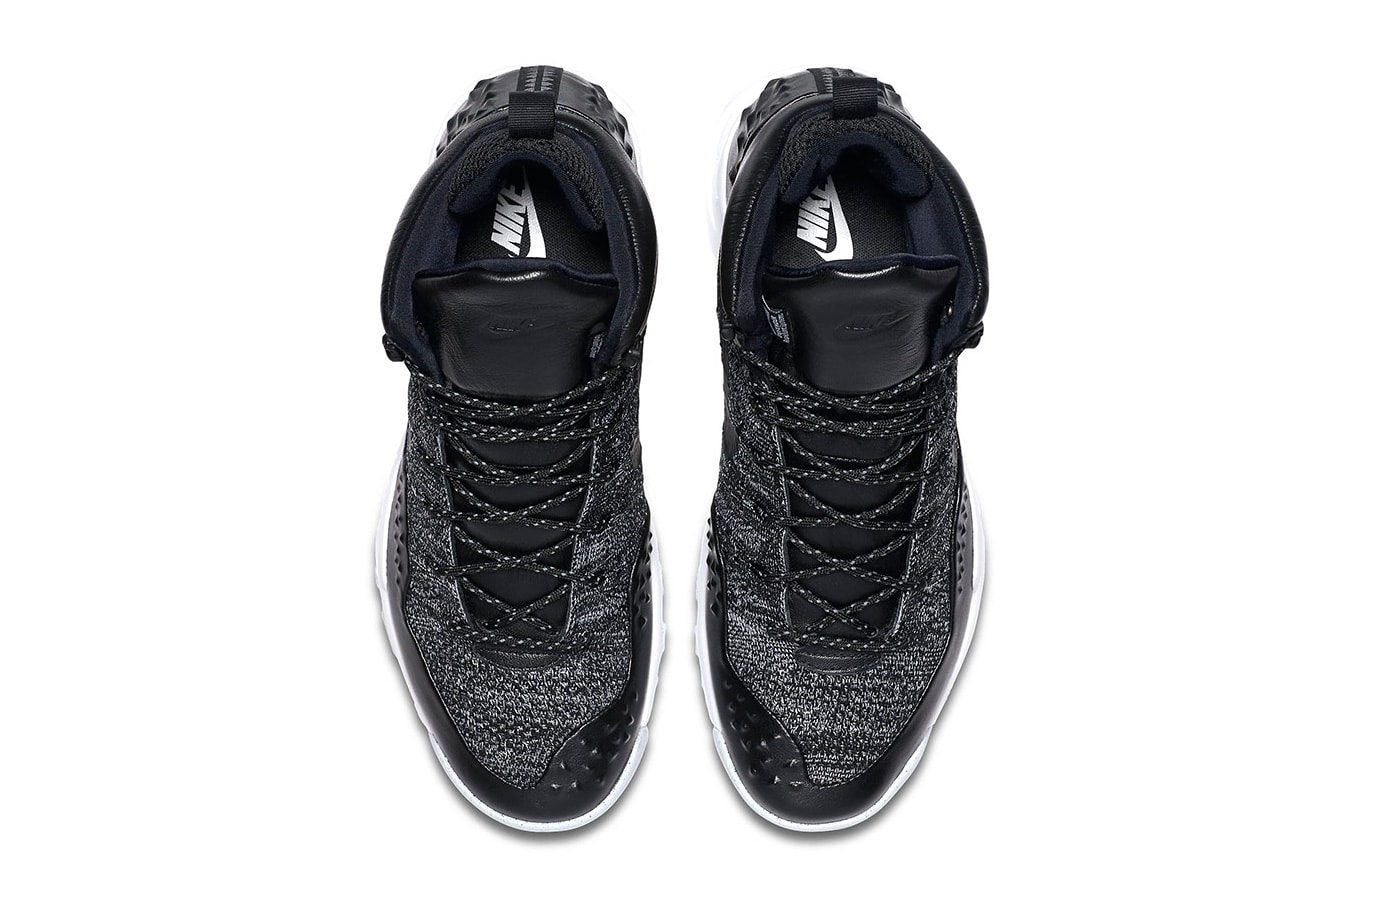 Nike Lupinek Flyknit Oreo Black and White Shoes Sneakers Black Leather White Midsole Traction